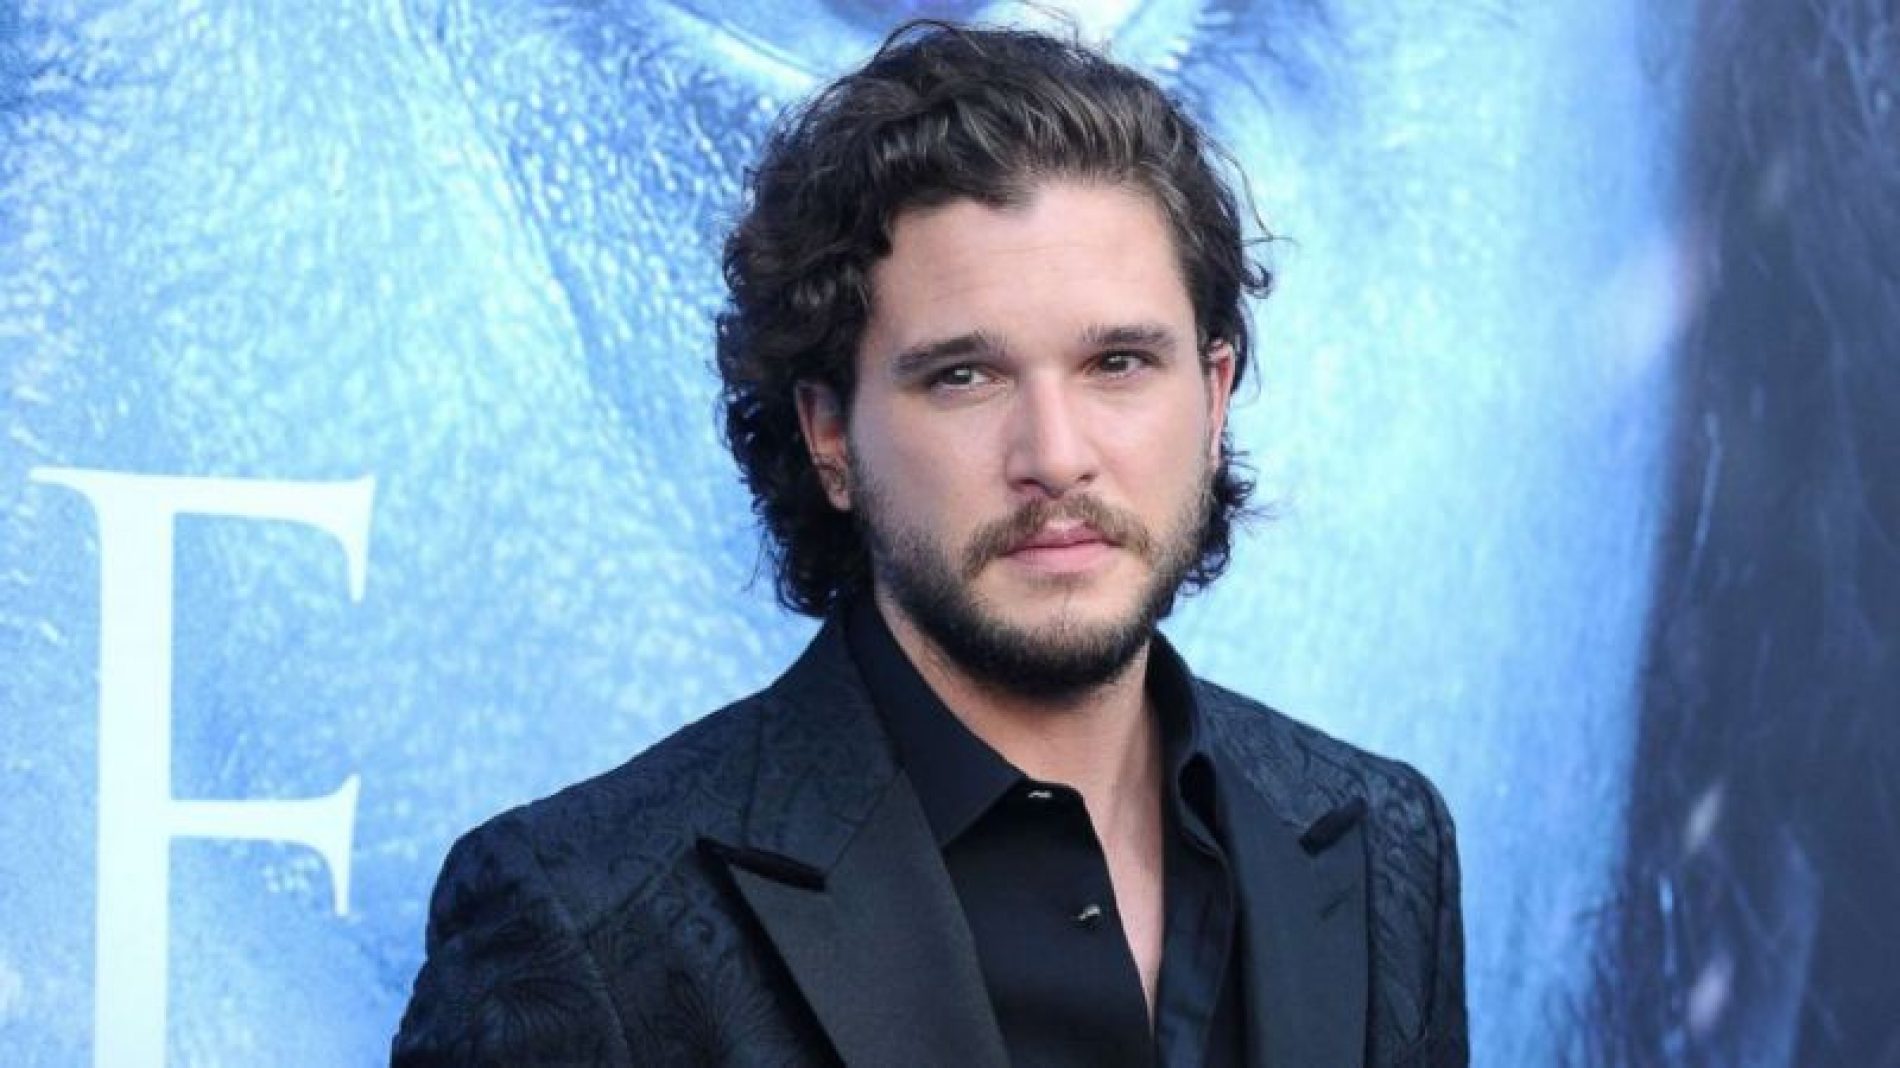 ‘Game of Thrones’ star, Kit Harington believes Hollywood has a ‘big problem’ with homophobia